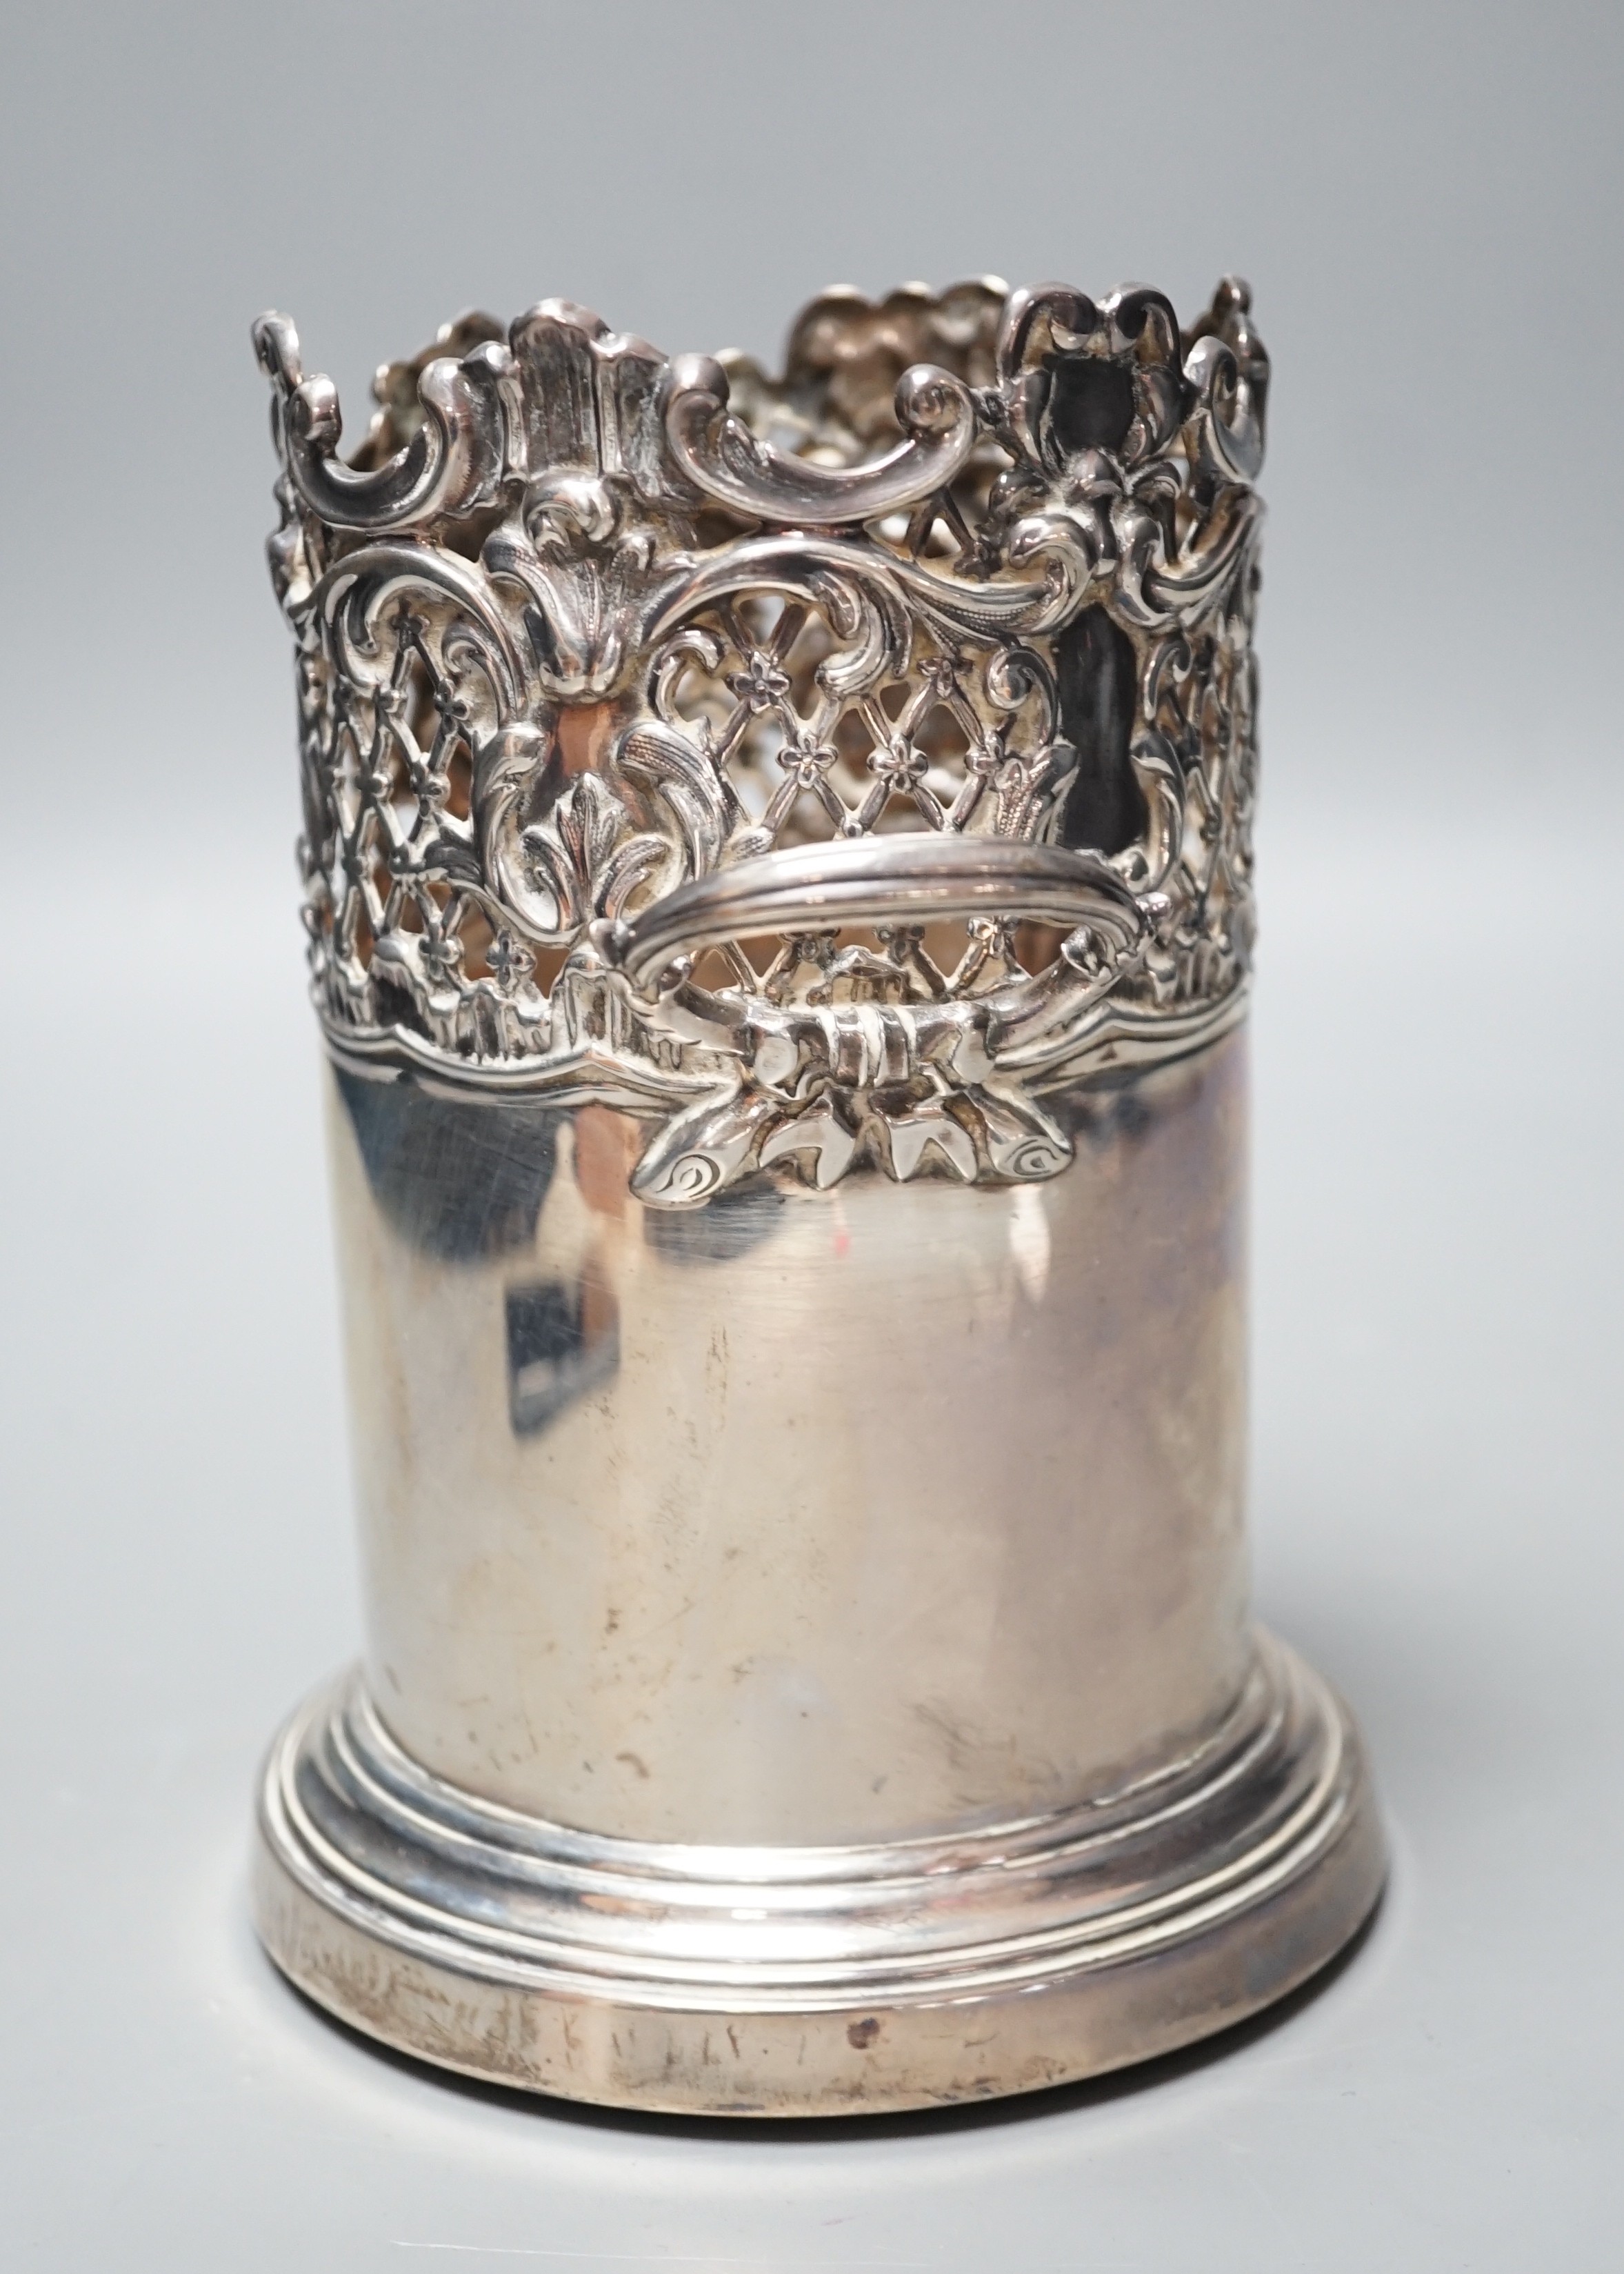 An Edwardian pierced silver mounted two handled syphon stand, by Goldsmiths & Silversmiths Co Ltd, London, 1903, 17.8cm, with turned wooden base.